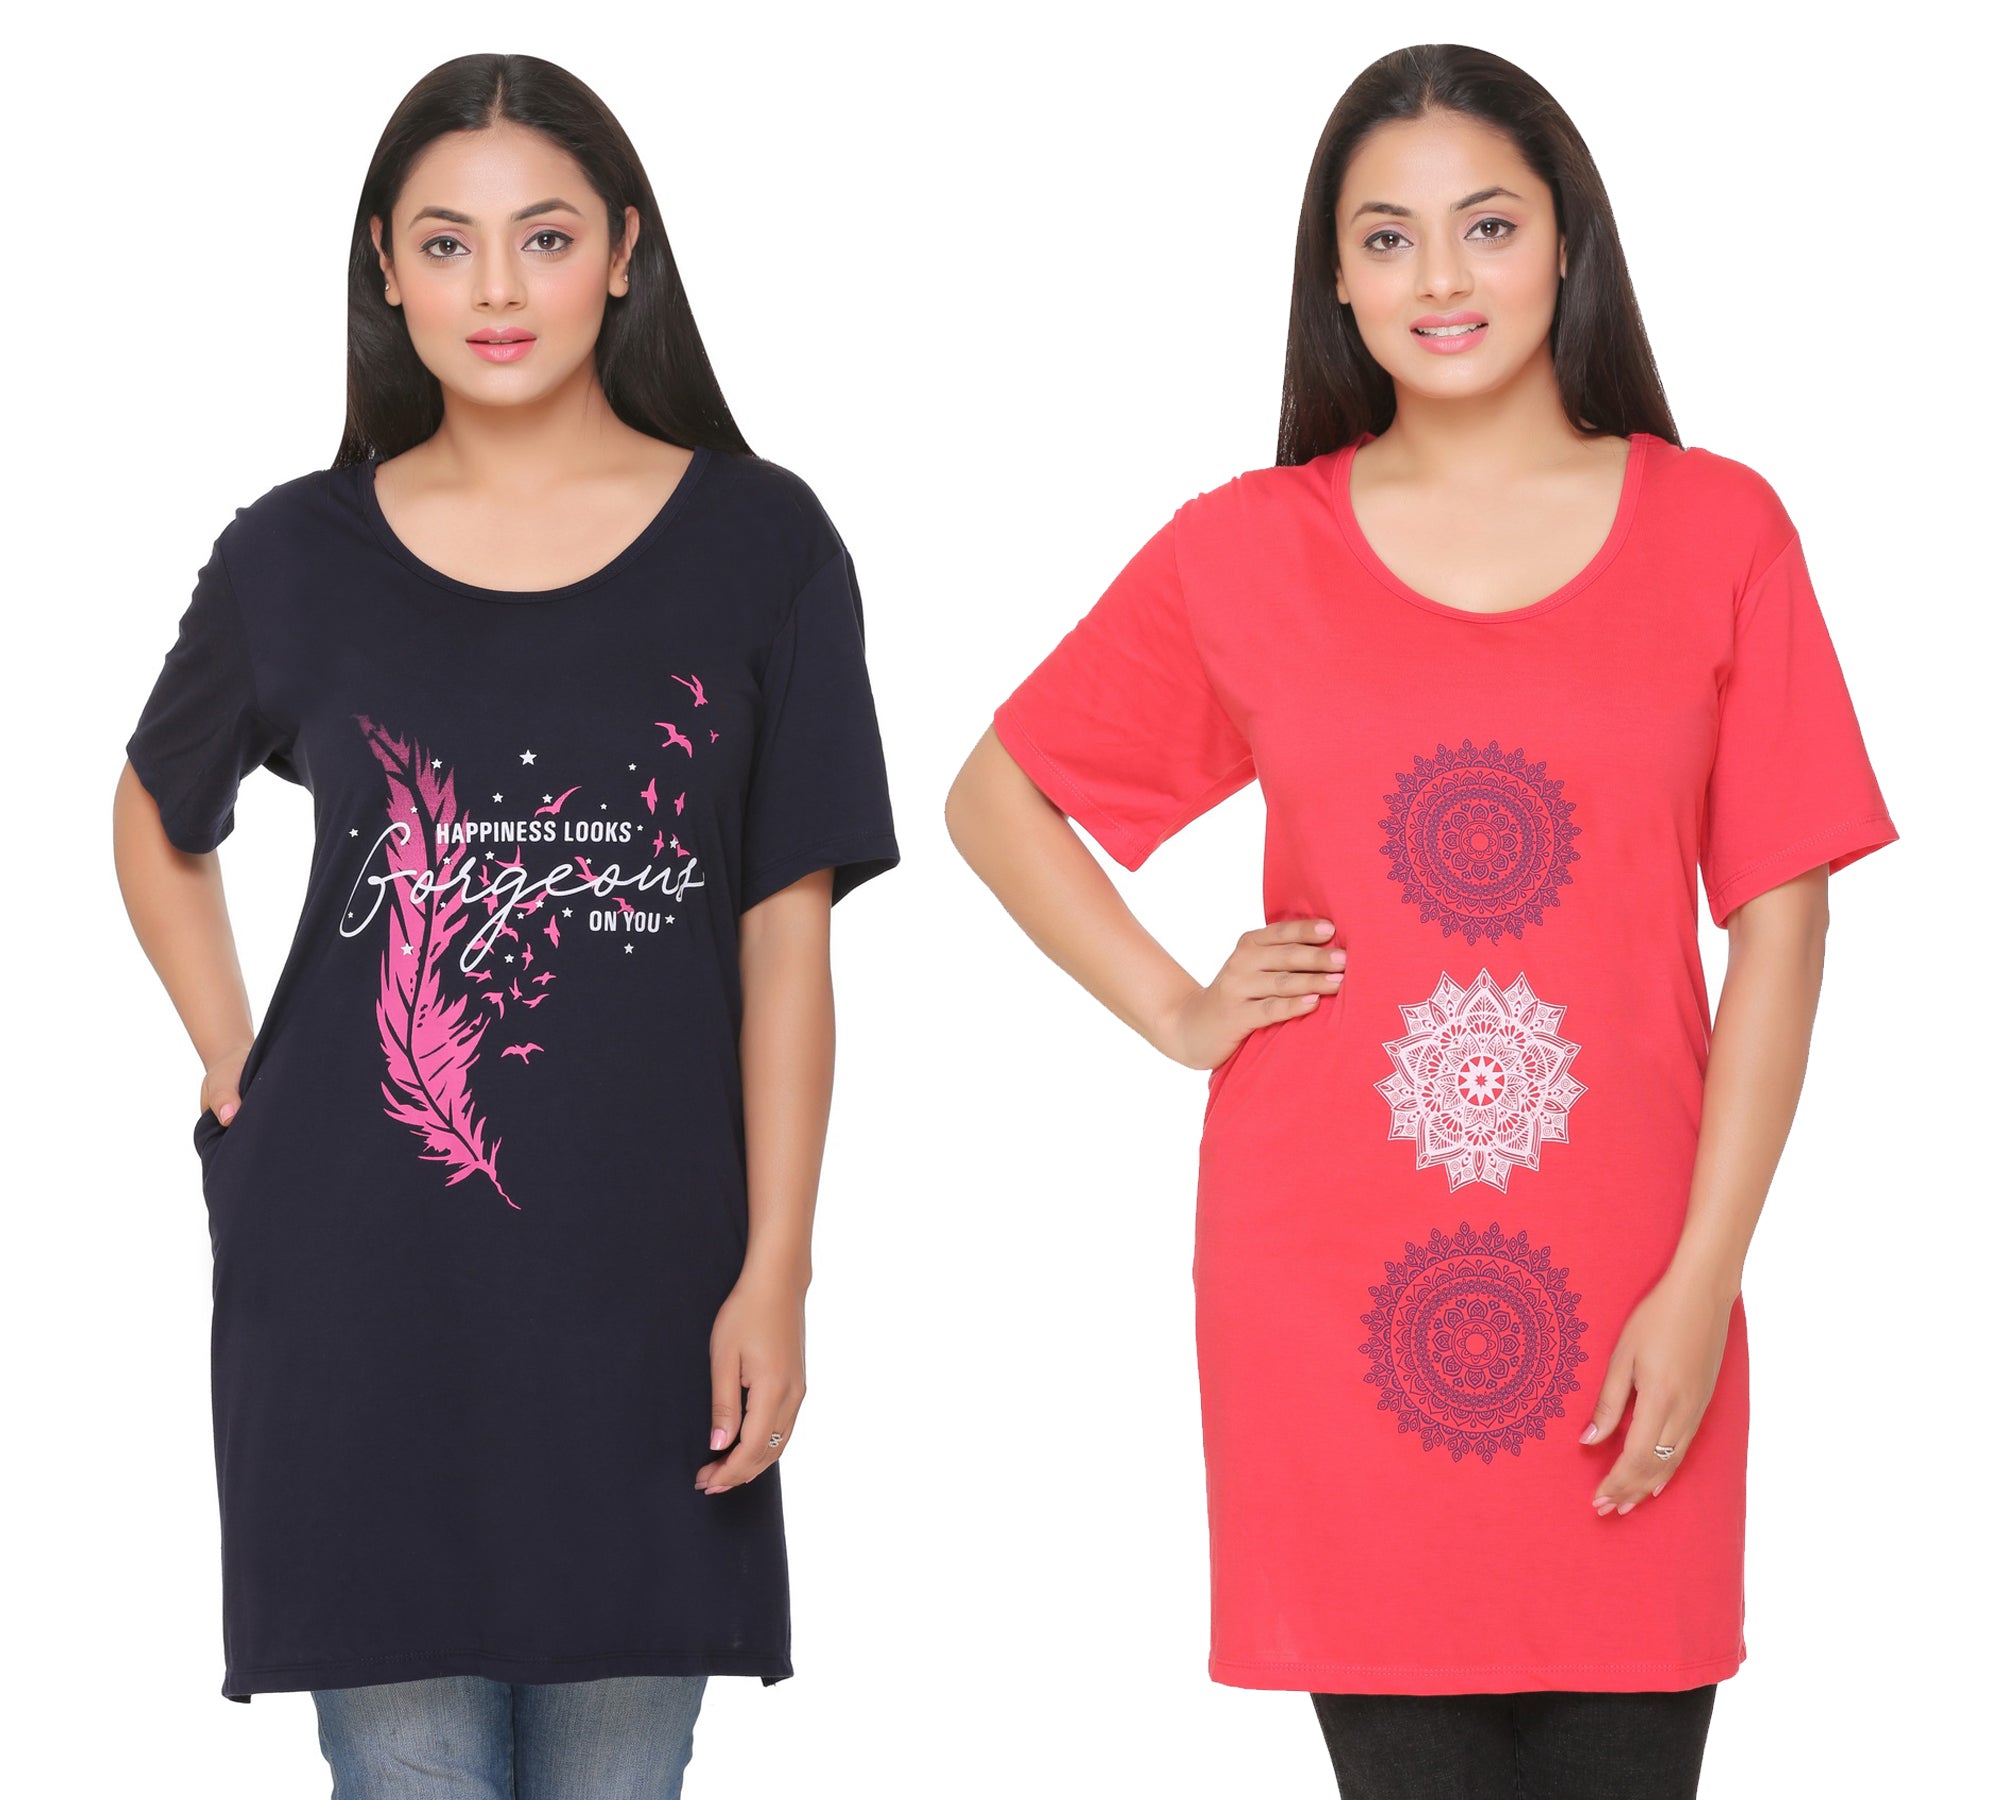 Plus Size Long T-shirts For Women - Half Sleeve - Pack of 2 (Navy Blue & Punch Pink)